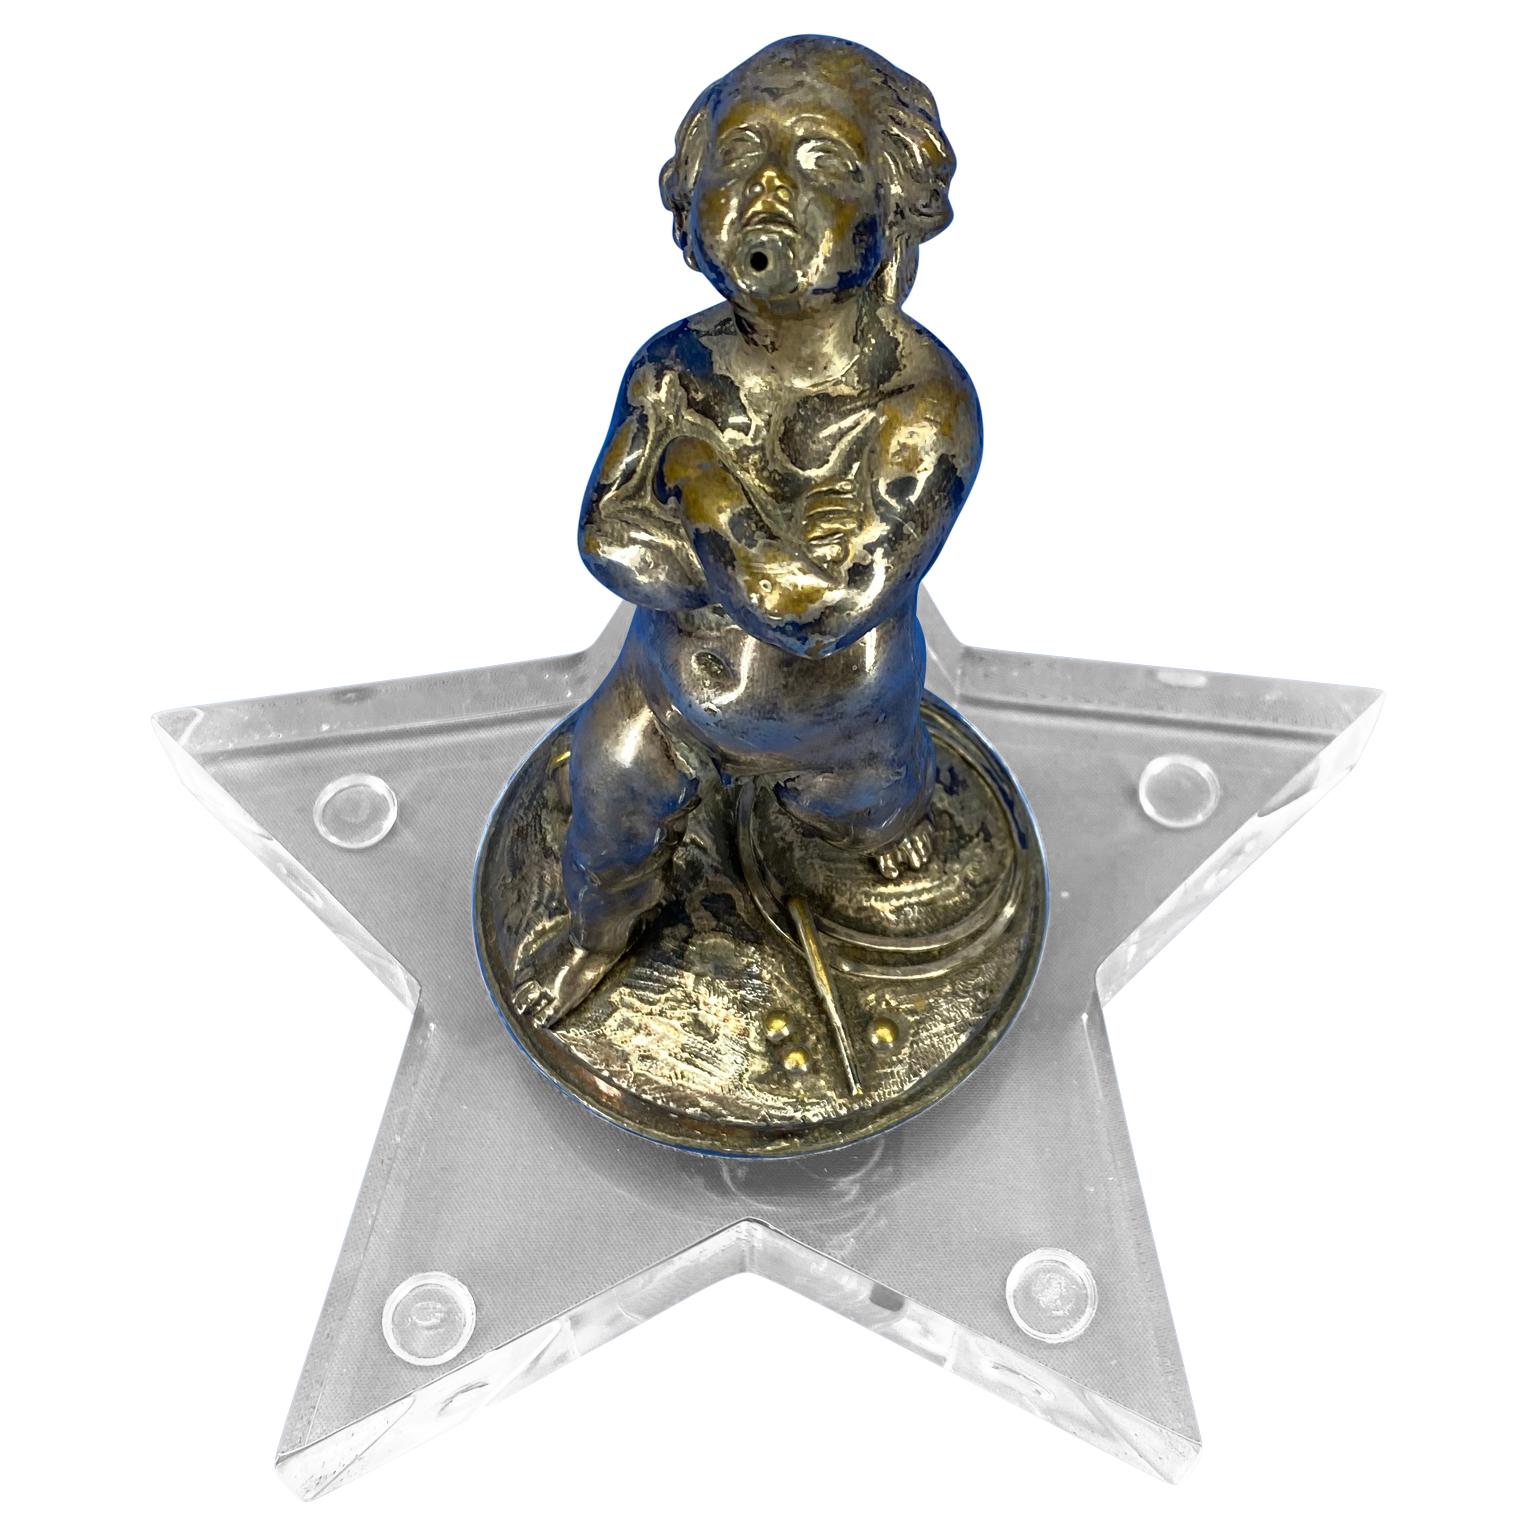 Baroque Early 19th Century Silver-Plated Putti On A Star-Shaped Lucite Base For Sale